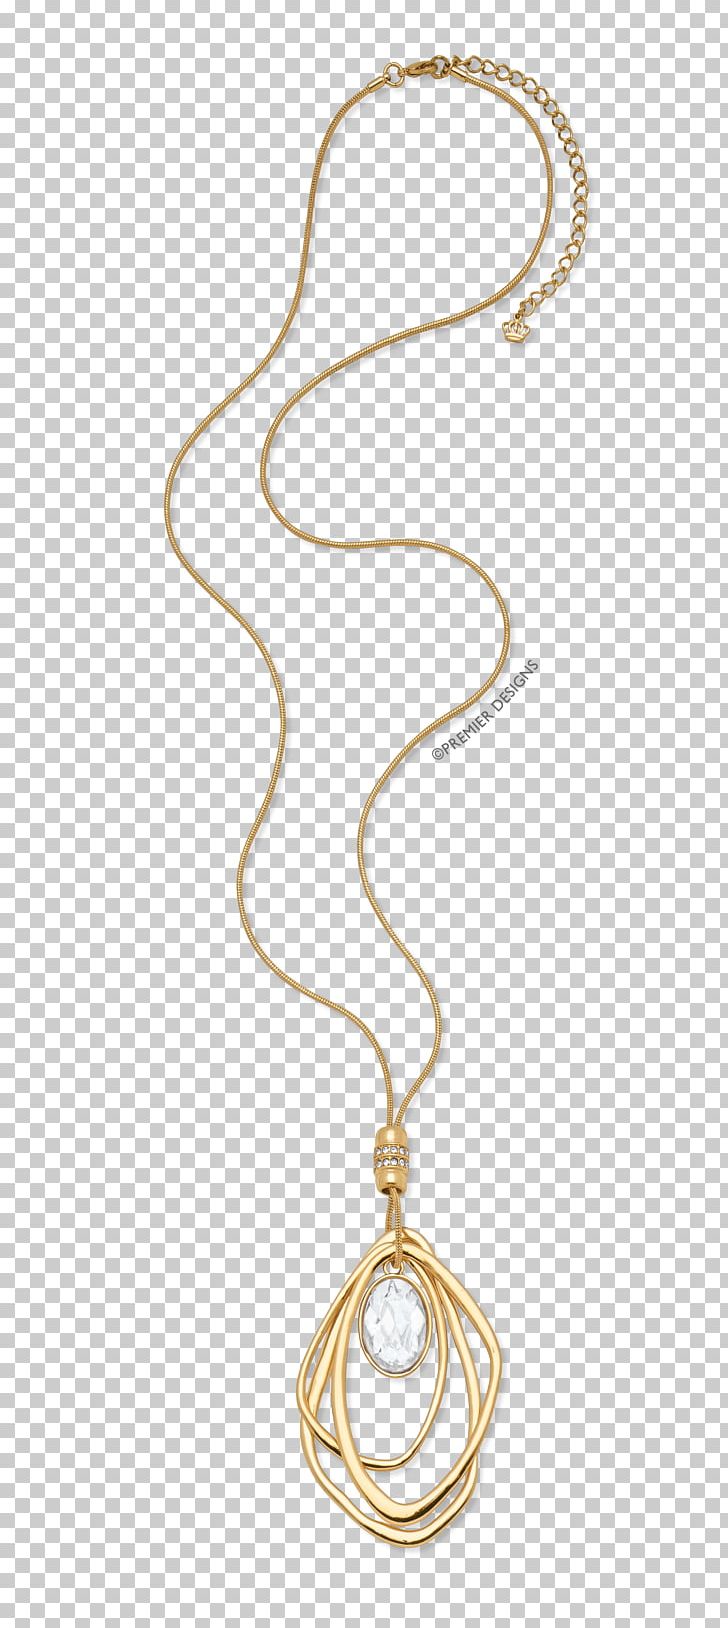 Locket Earring Necklace Jewellery PNG, Clipart, Blingbling, Body Jewellery, Body Jewelry, Boutique, Bracelet Free PNG Download